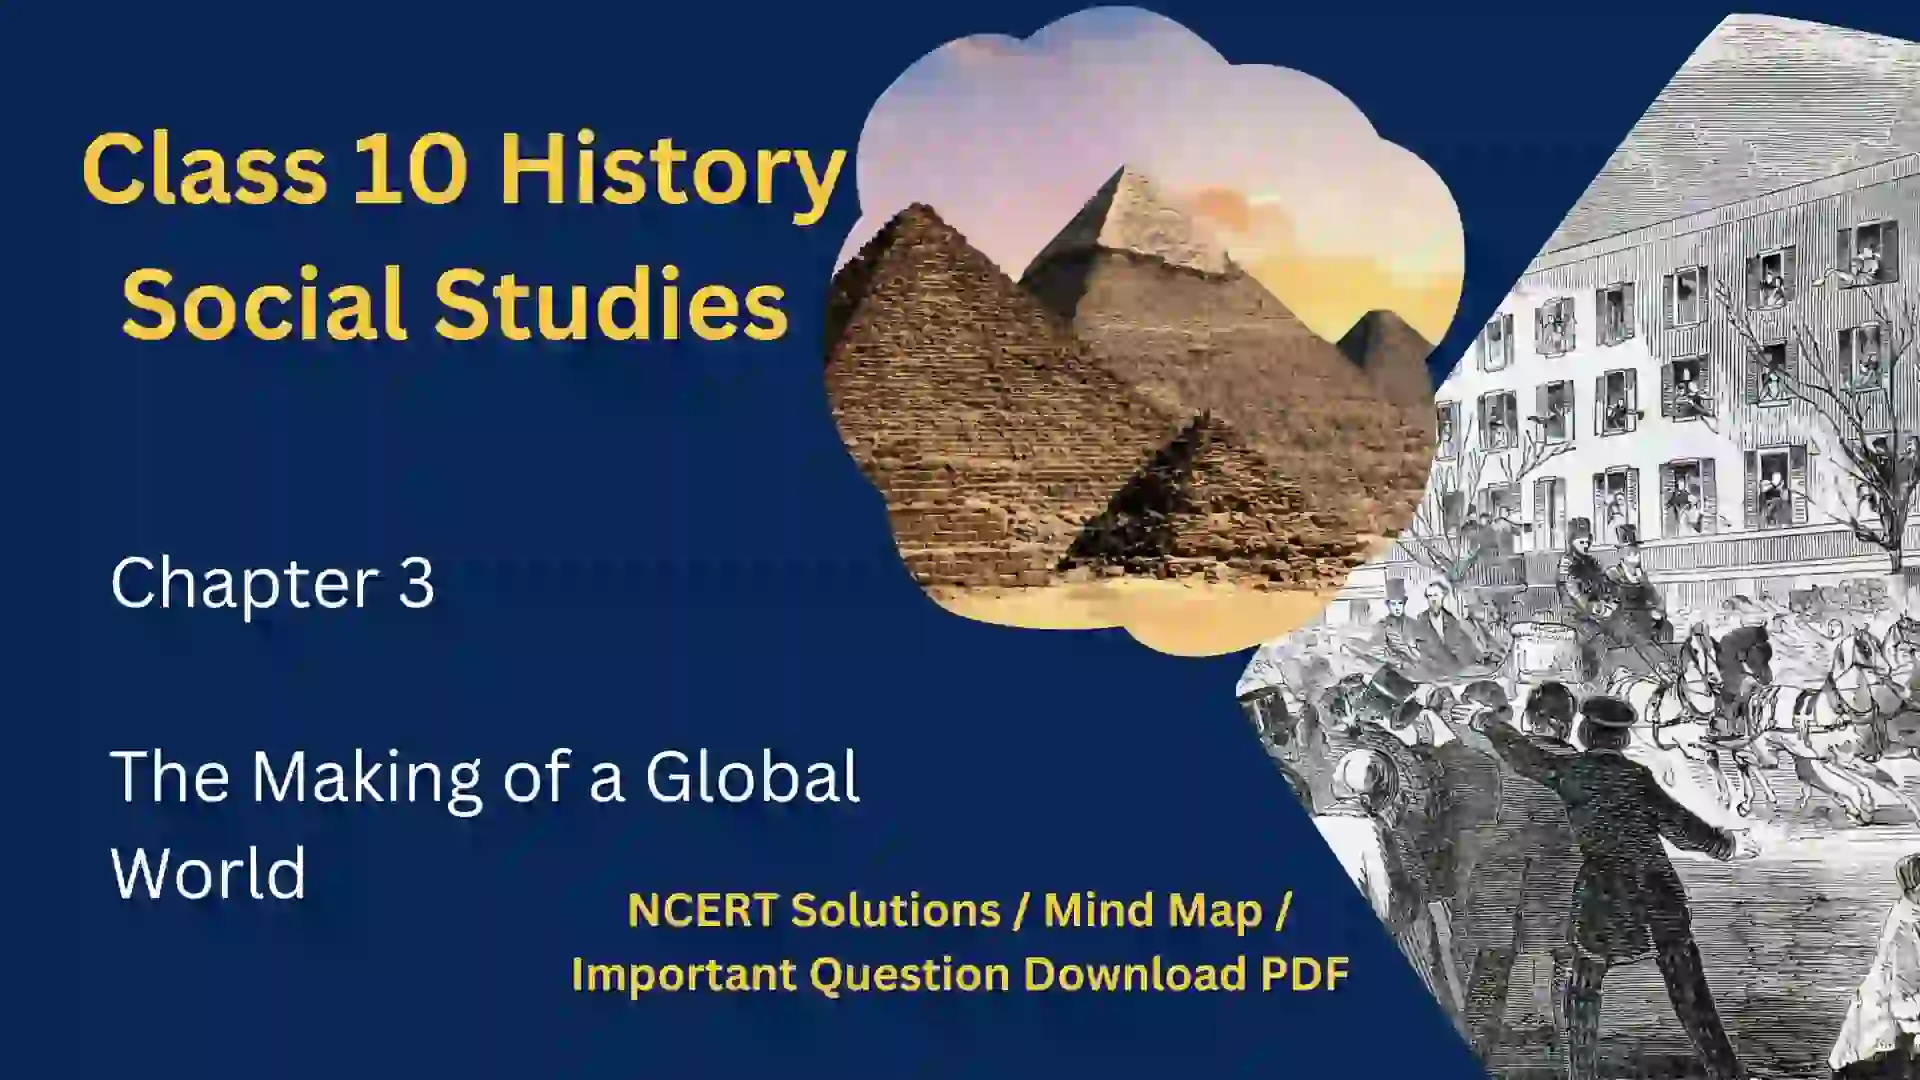 Class 10 Social Studies History Chapter 3 The Making of a Global World